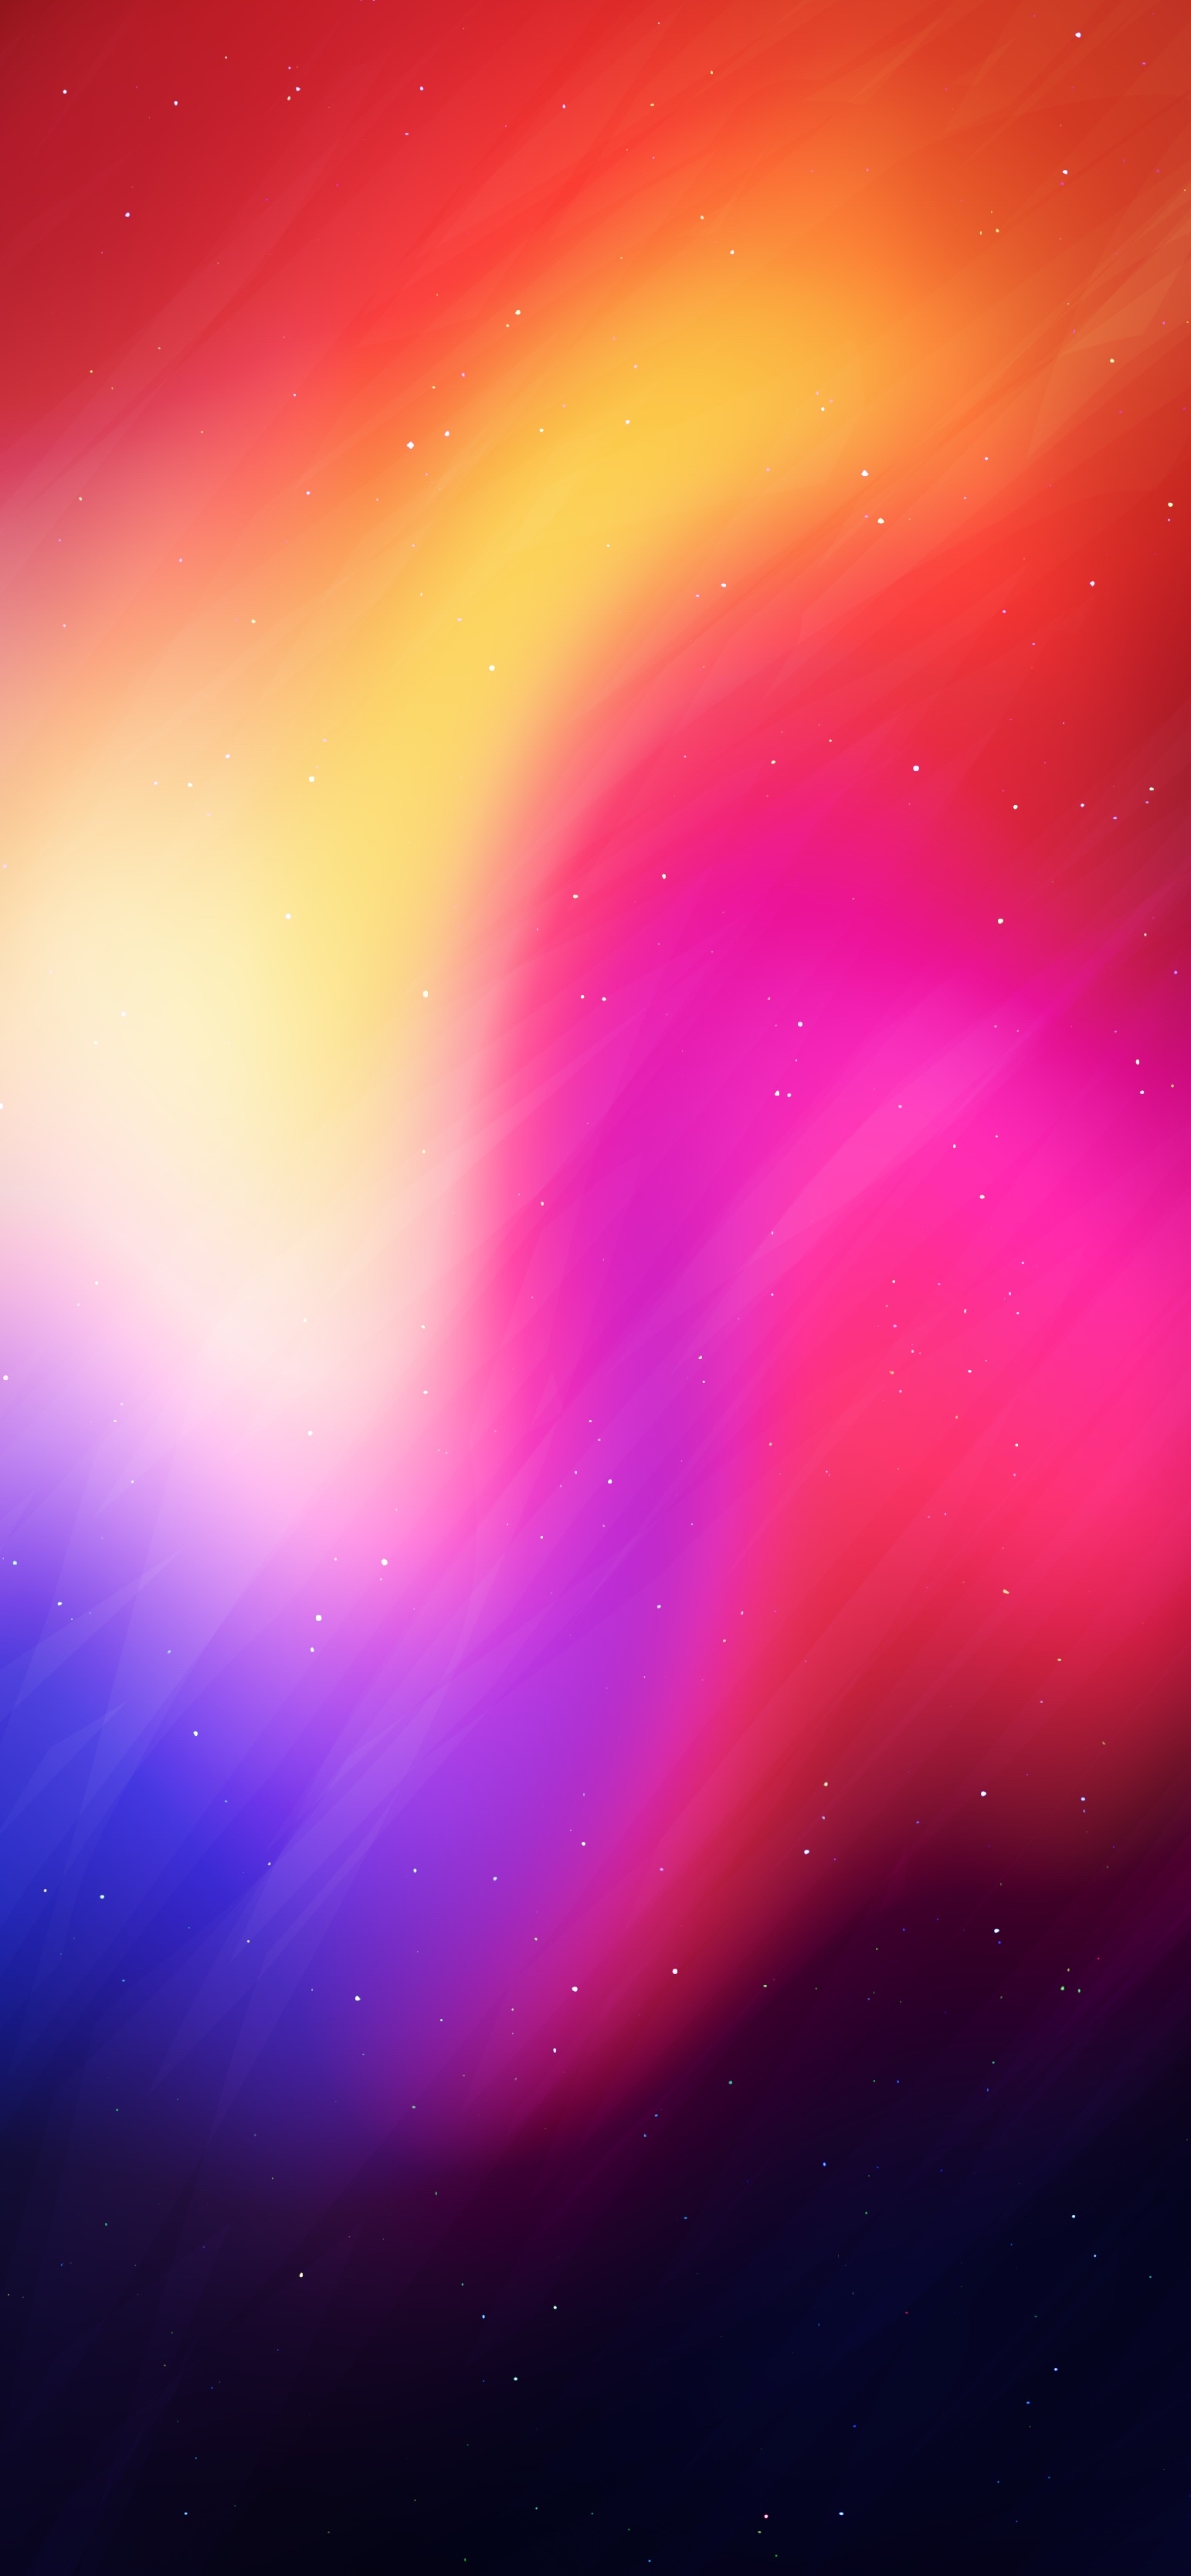 Red Space Galaxy Sunrise Northern Lights wallpaper for Apple iPhone, Mac, iPad and more